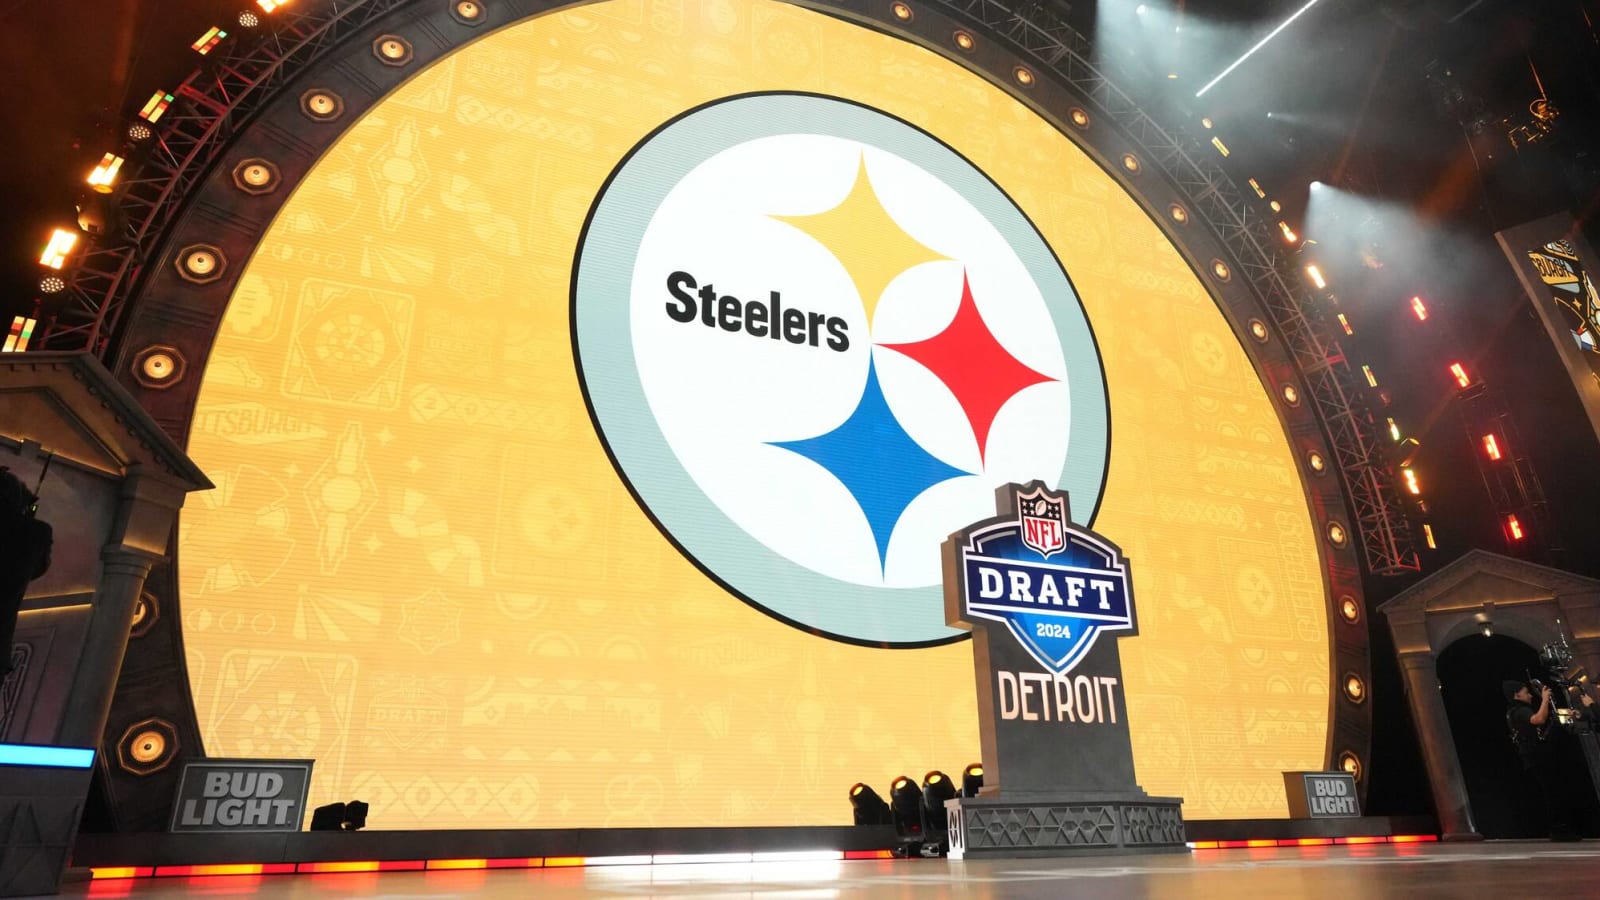 Analyst Thinks Steelers Are Drafting Players That Fit the Brand